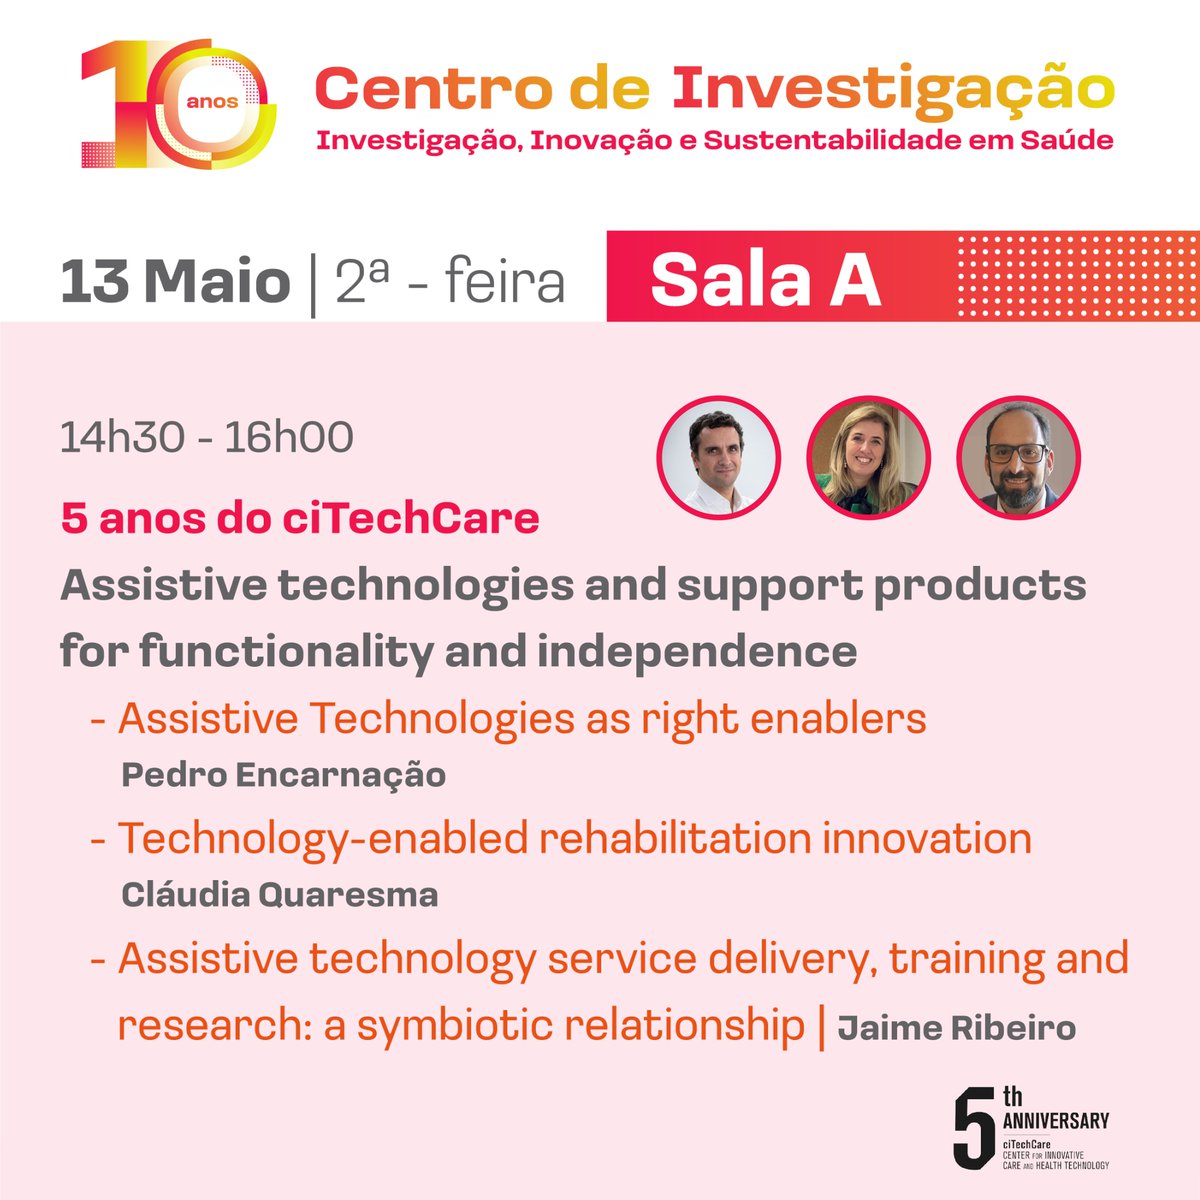 • CITECHCARE CELEBRATES ITS 5TH ANNIVERSARY •
‘Assistive technologies and support products for functionality and independence’ is the first session of the celebrations of the 5th anniversary of ciTechCare, which will take place on May 13, at 2:30 p.m.
factorchave.com/10-anos-centro…